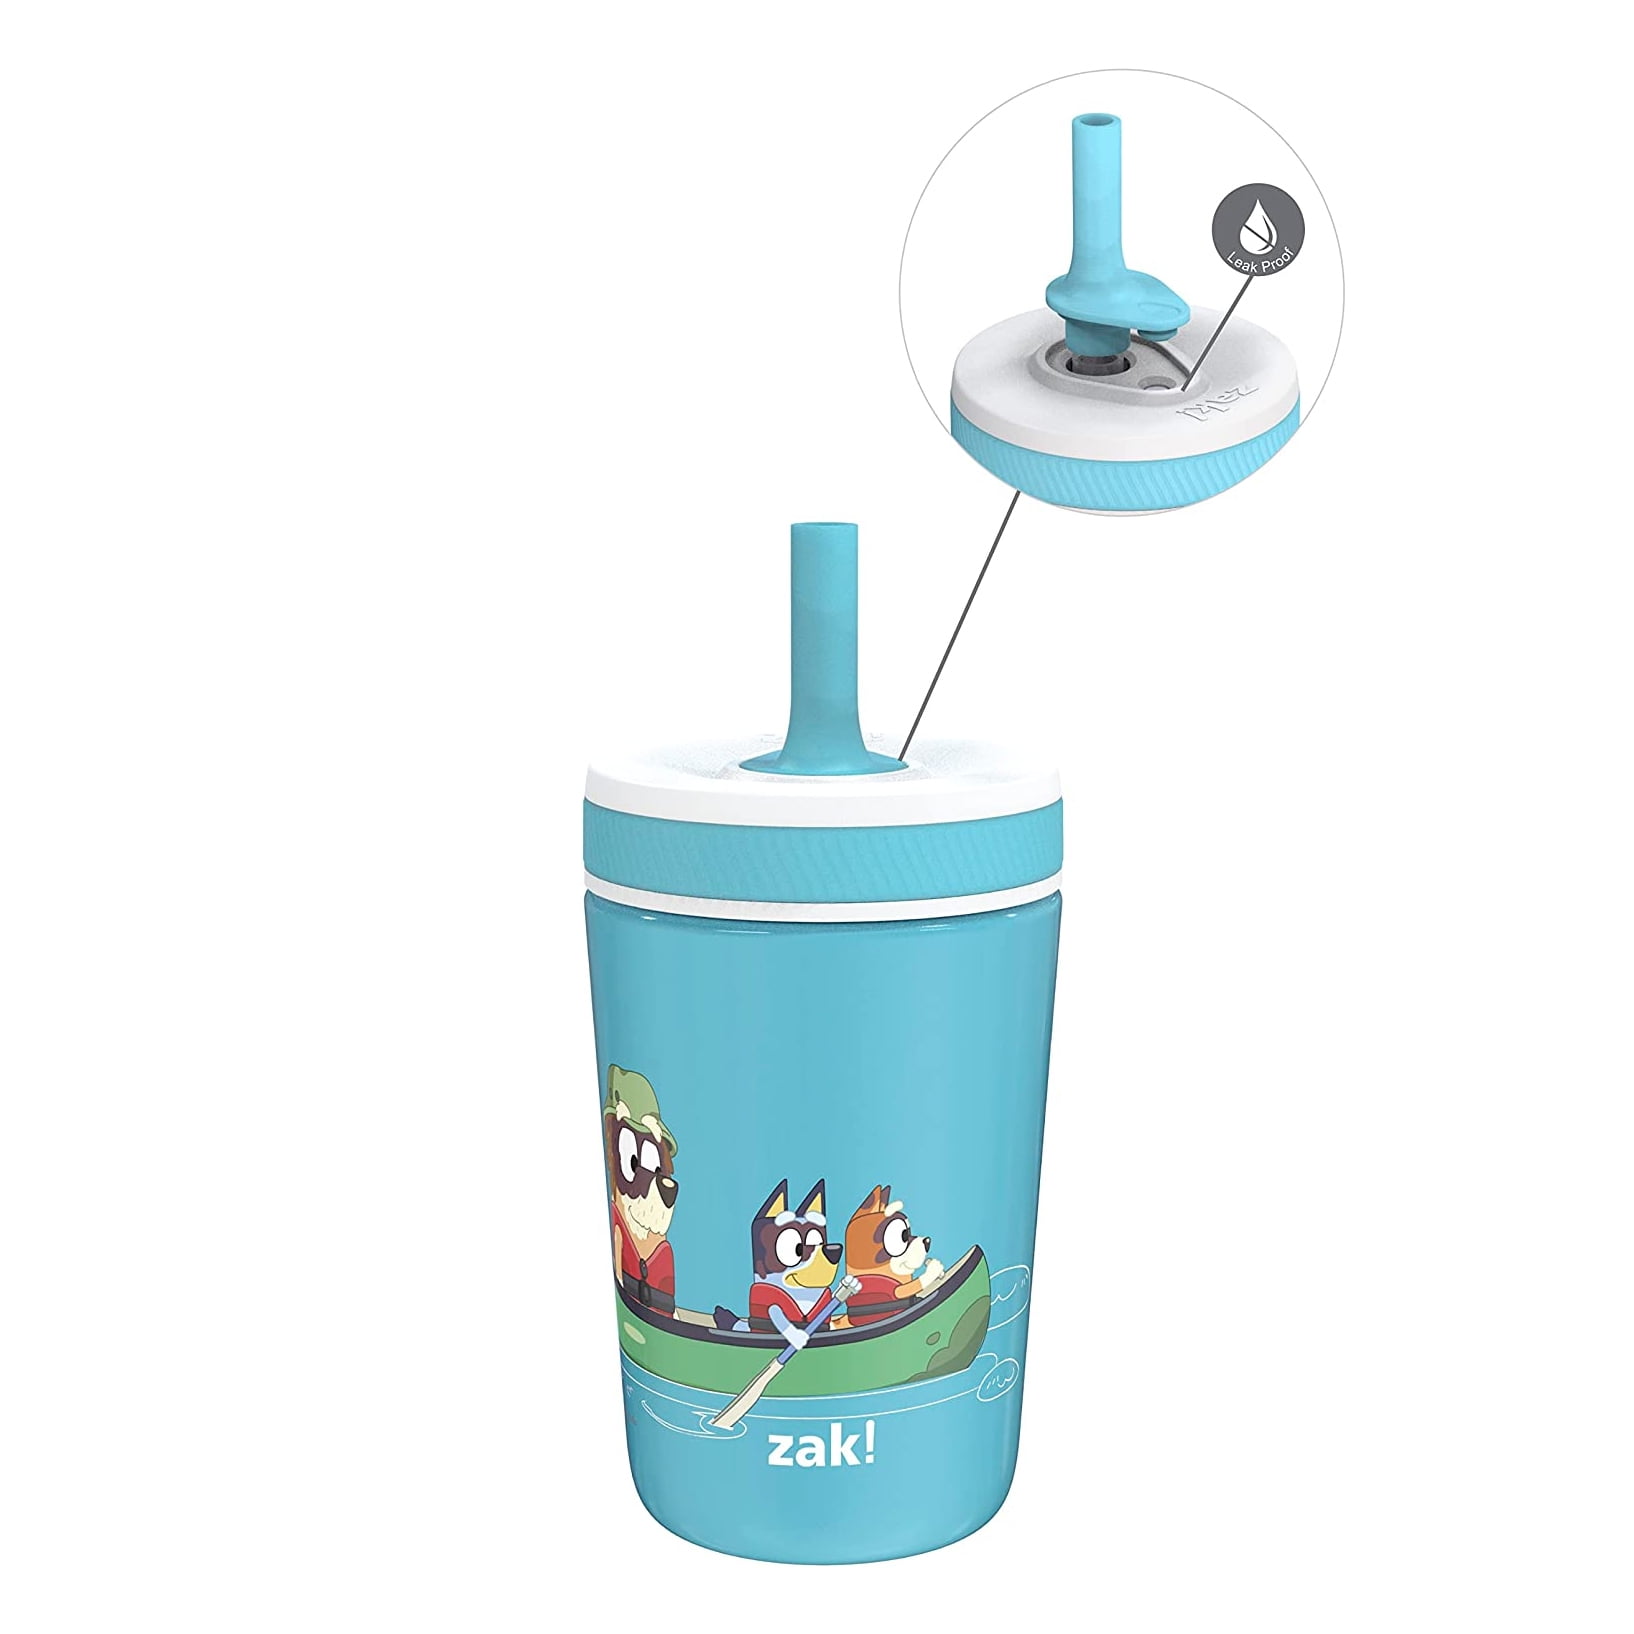 NEW ZAK Elf on the Shelf Insulated Toddler Cup 8.7 oz sippy cup #1